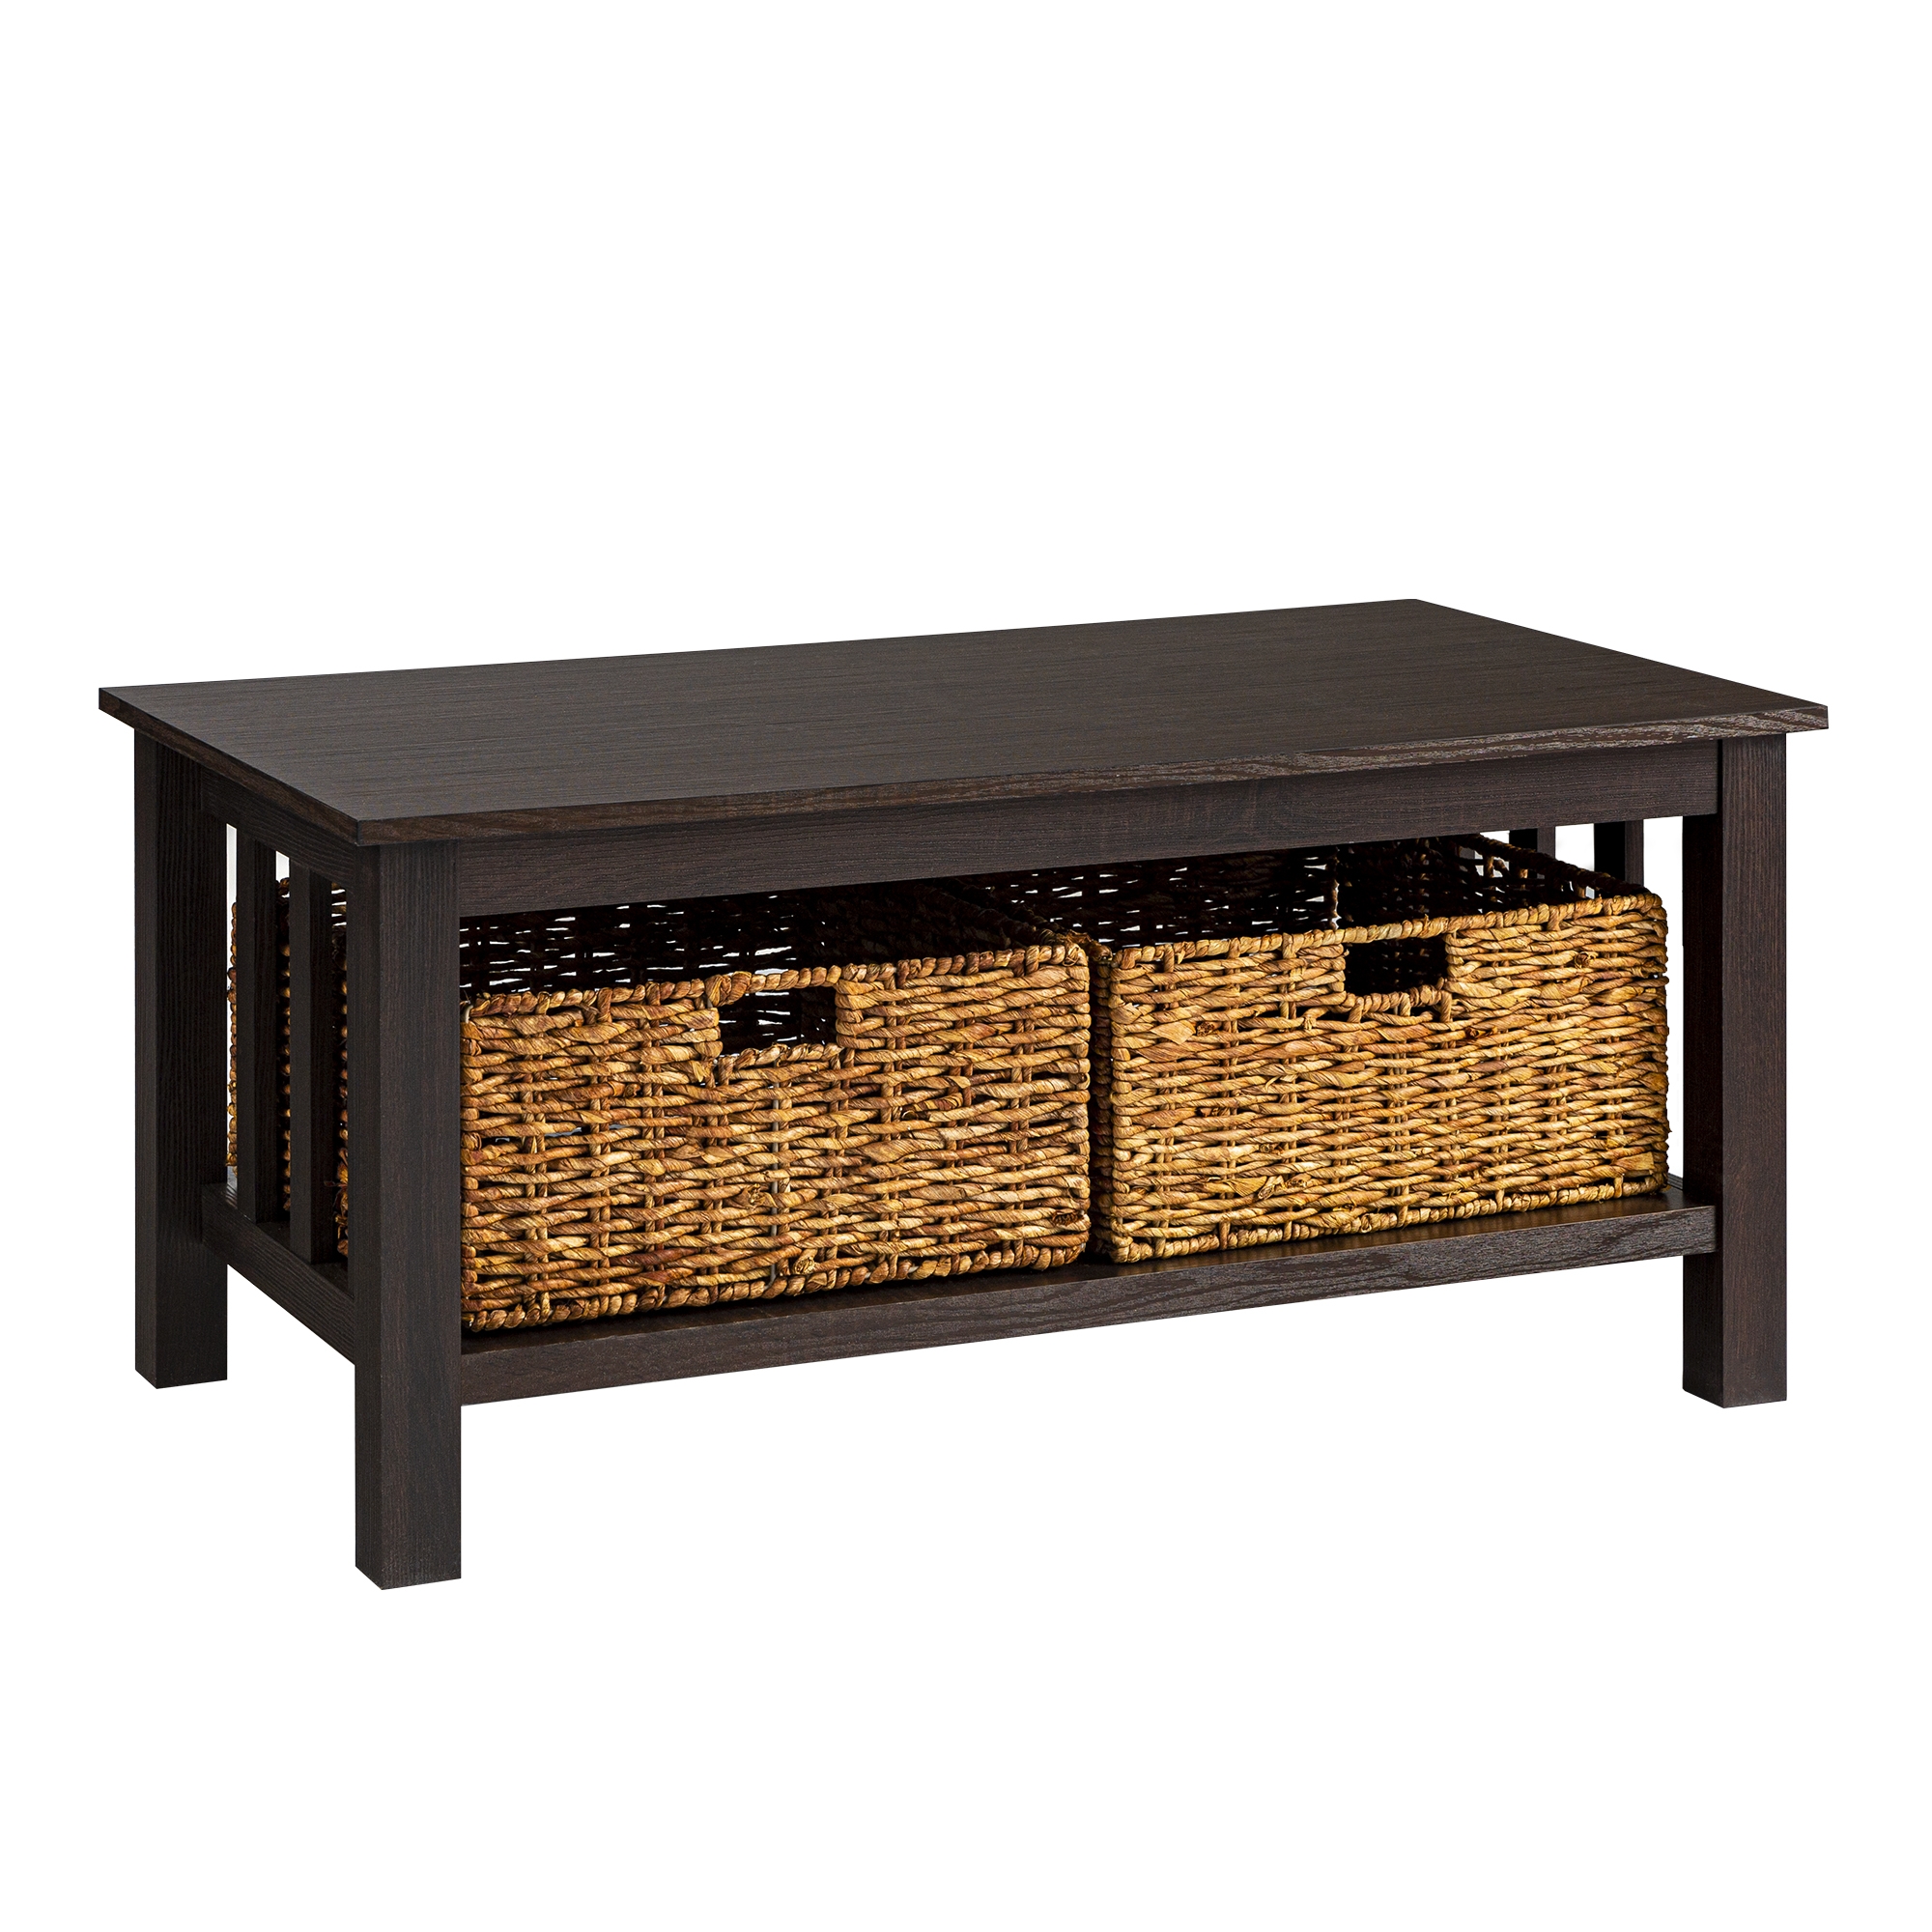 Mission Storage Coffee Table with Baskets - Espresso - Image 0